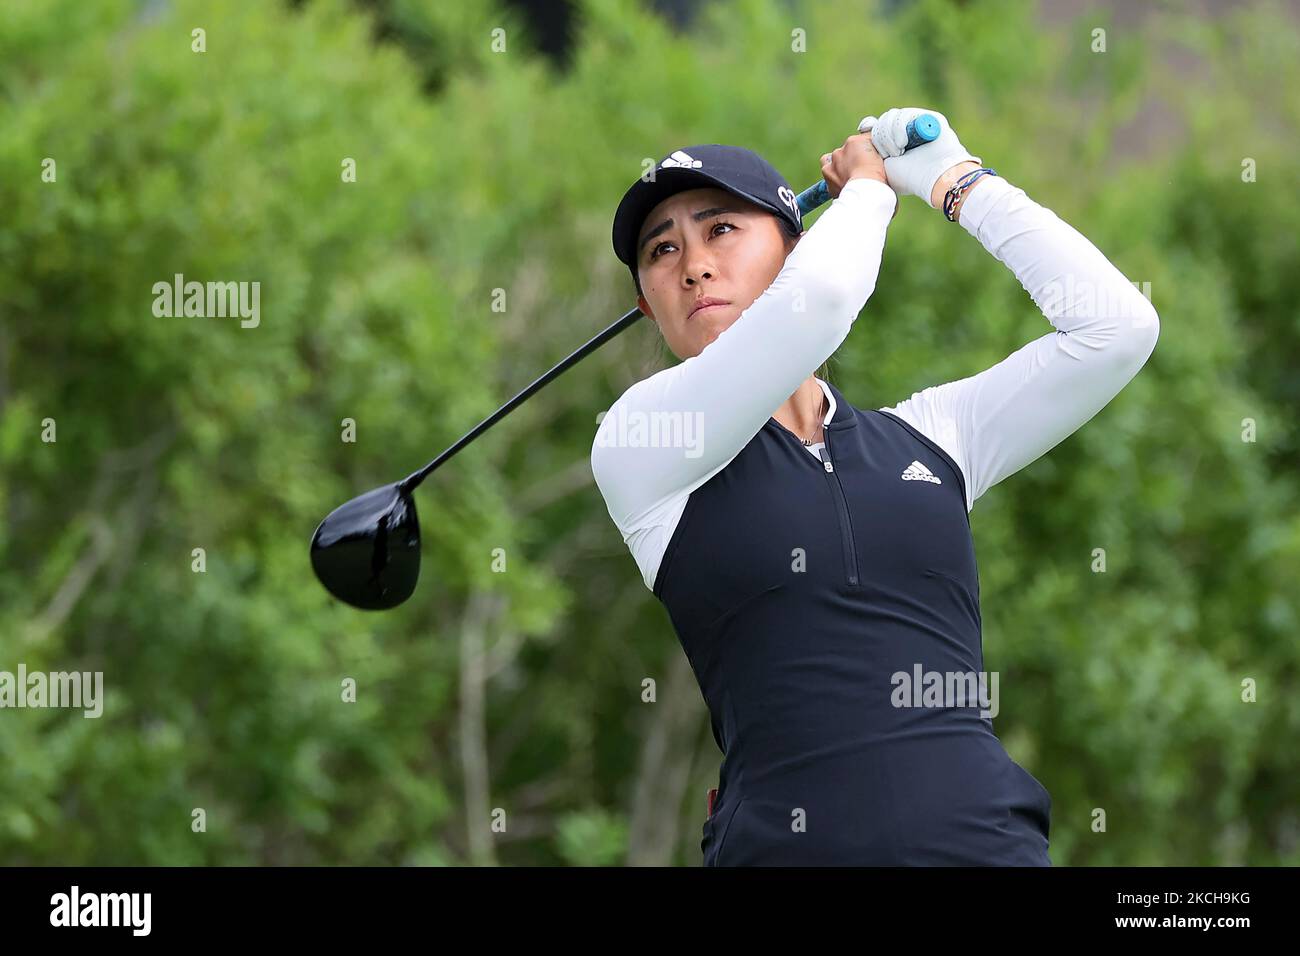 Danielle Kang of Las Vegas, Nevada hits from the 16th tee during the second round of the Marathon LPGA Classic golf tournament at Highland Meadows Golf Club in Sylvania, Ohio, USA Friday, July 9, 2021. (Photo by Amy Lemus/NurPhoto) Stock Photo